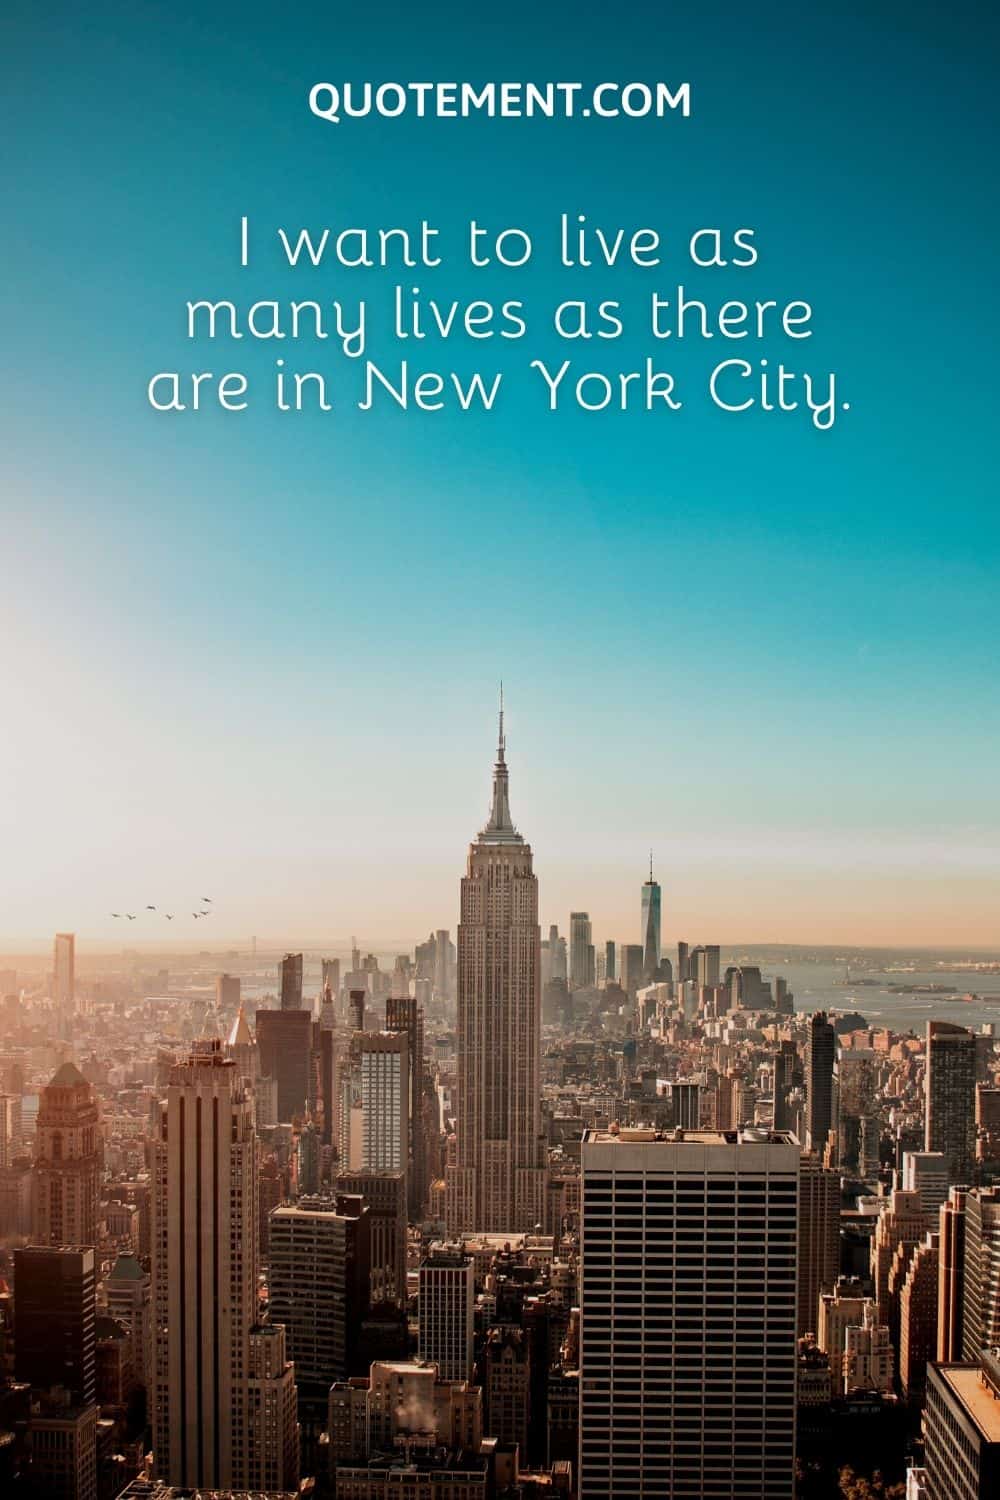 I want to live as many lives as there are in New York City